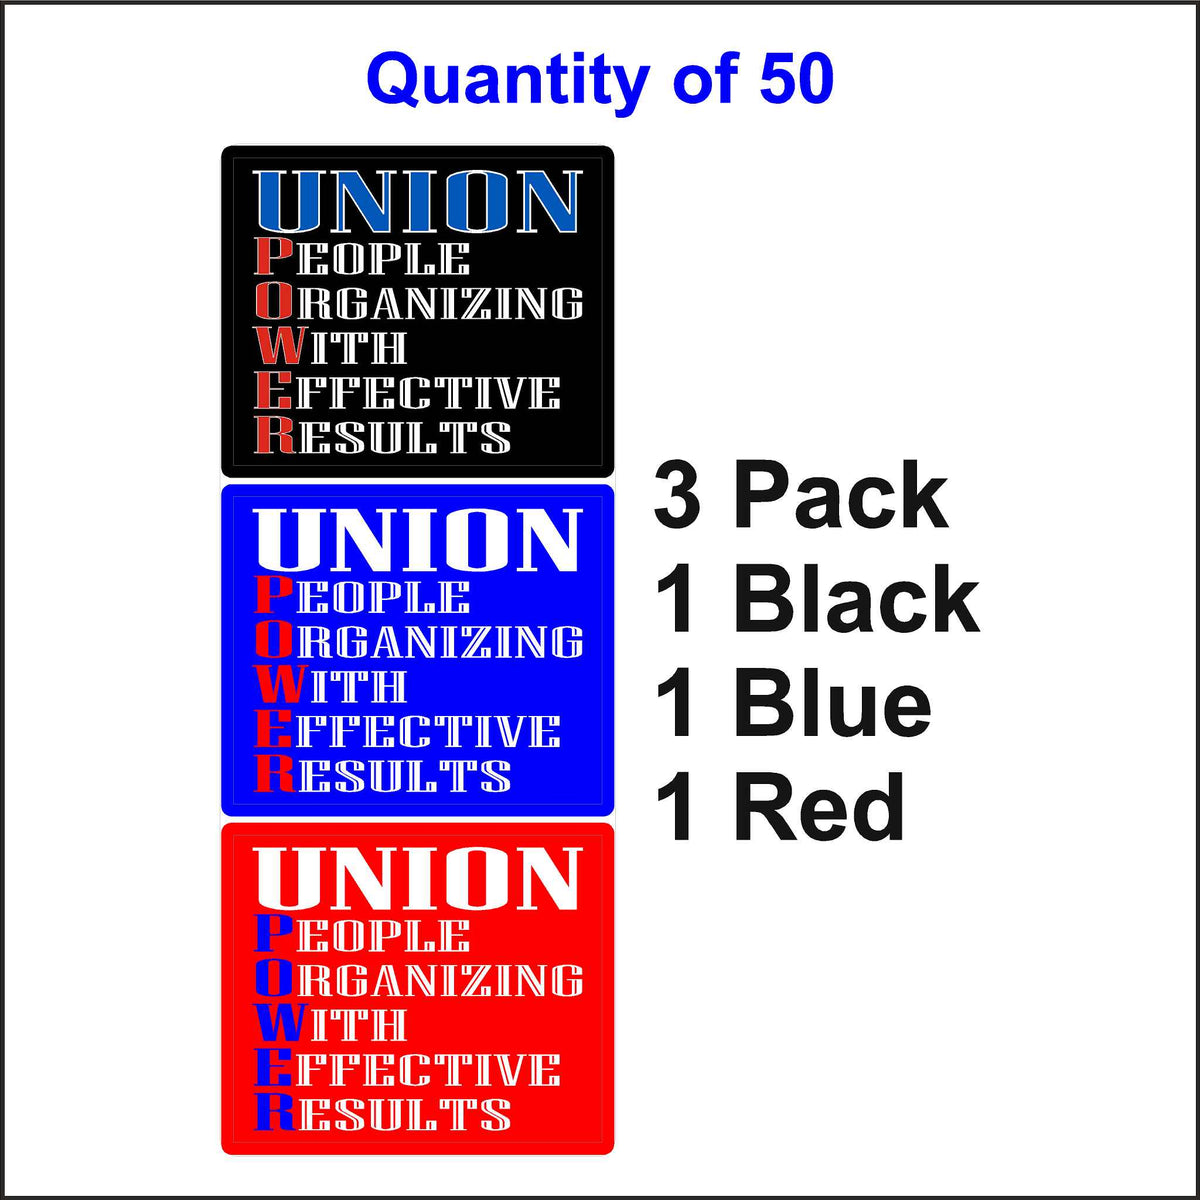 Union Power Stickers. One Black, One Blue, and One Red. 50 Quantity.